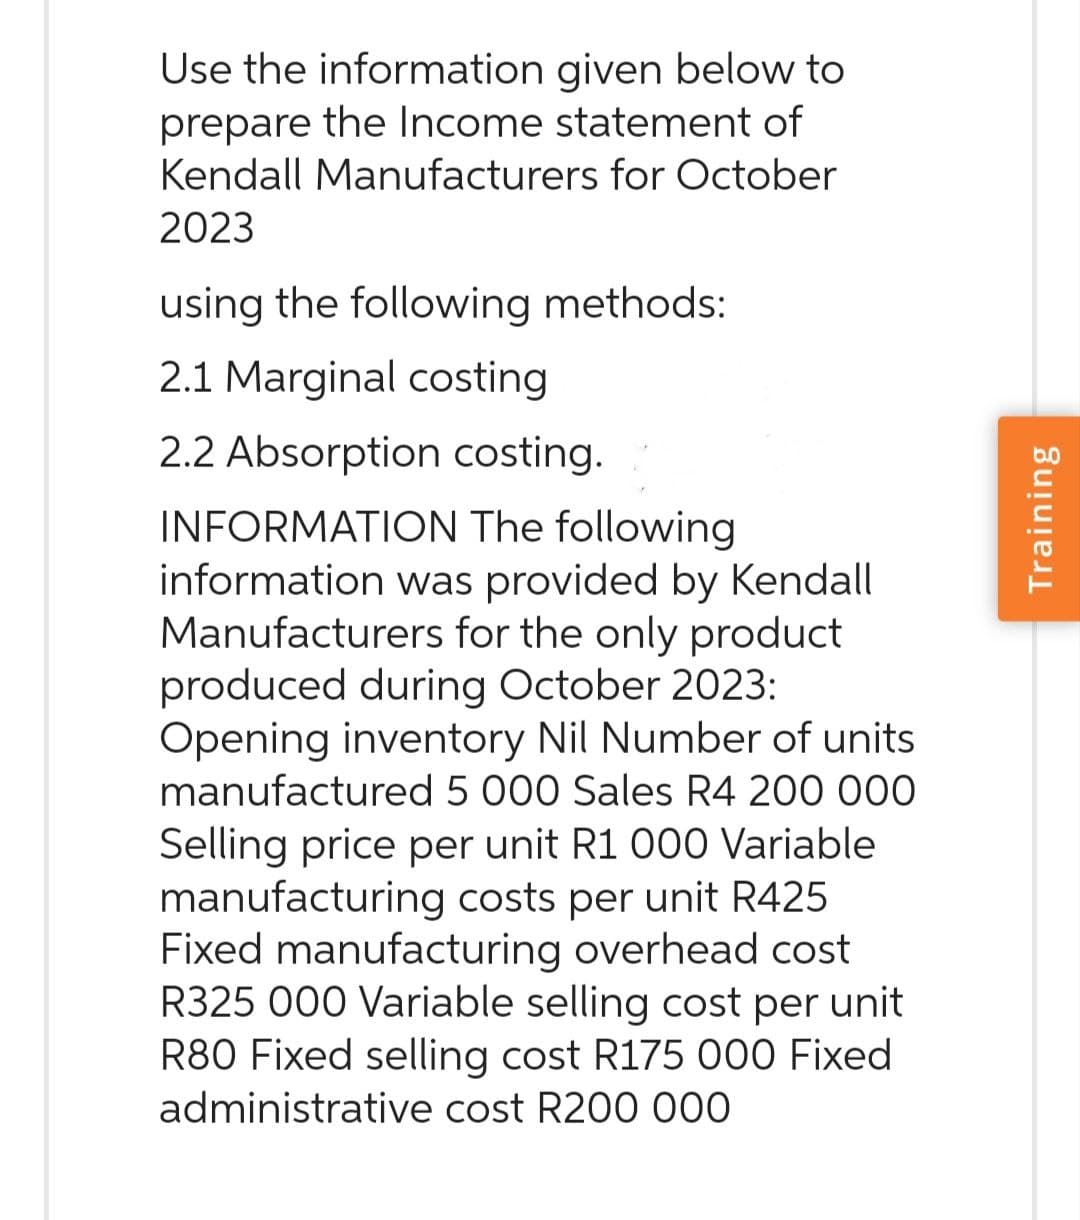 Use the information given below to
prepare the Income statement of
Kendall Manufacturers for October
2023
using the following methods:
2.1 Marginal costing
2.2 Absorption costing.
INFORMATION The following
information was provided by Kendall
Manufacturers for the only product
produced during October 2023:
Opening inventory Nil Number of units
manufactured 5 000 Sales R4 200 000
Selling price per unit R1 000 Variable
manufacturing costs per unit R425
Fixed manufacturing overhead cost
R325 000 Variable selling cost per unit
R80 Fixed selling cost R175 000 Fixed
administrative cost R200 000
Training